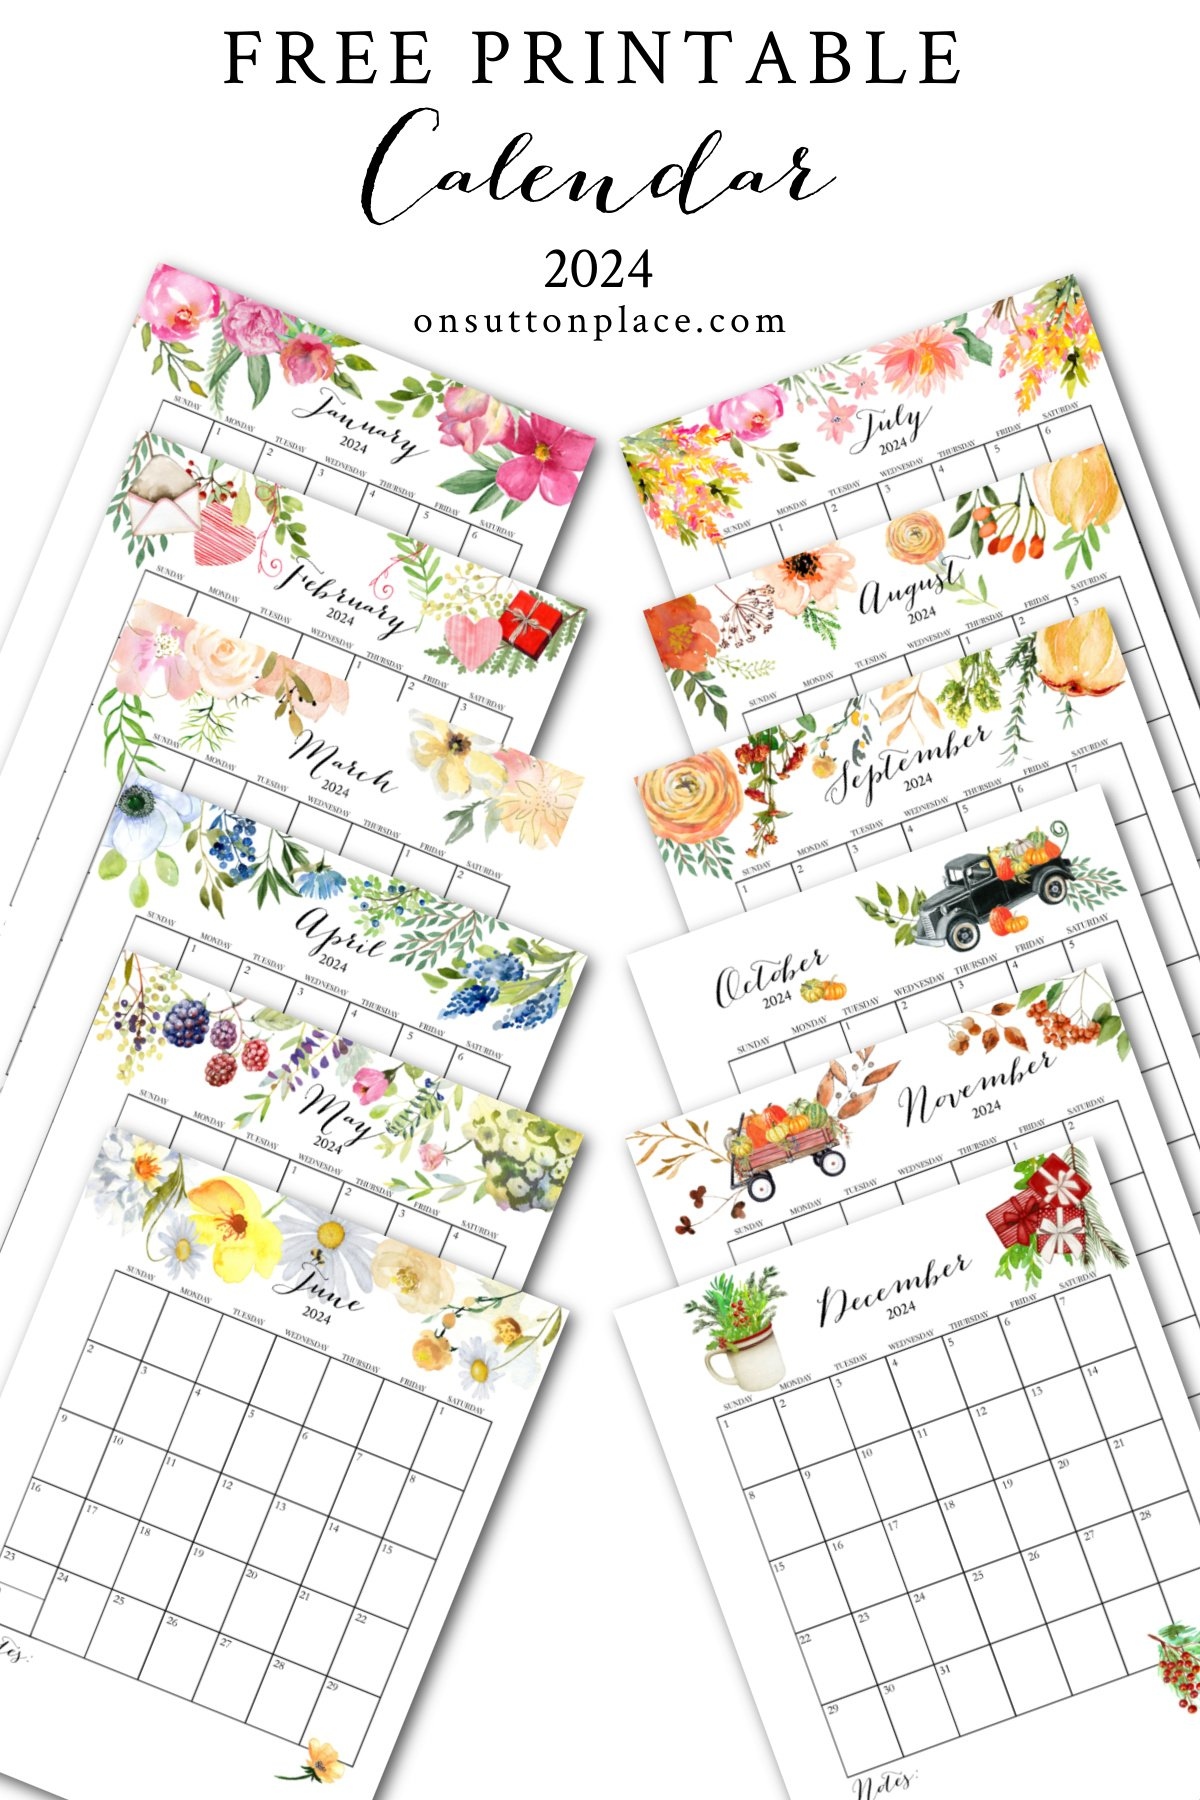 2024 Free Printable Calendar With Planner Pages - On Sutton Place regarding Free Printable Calendar 2024 Cute Pdf